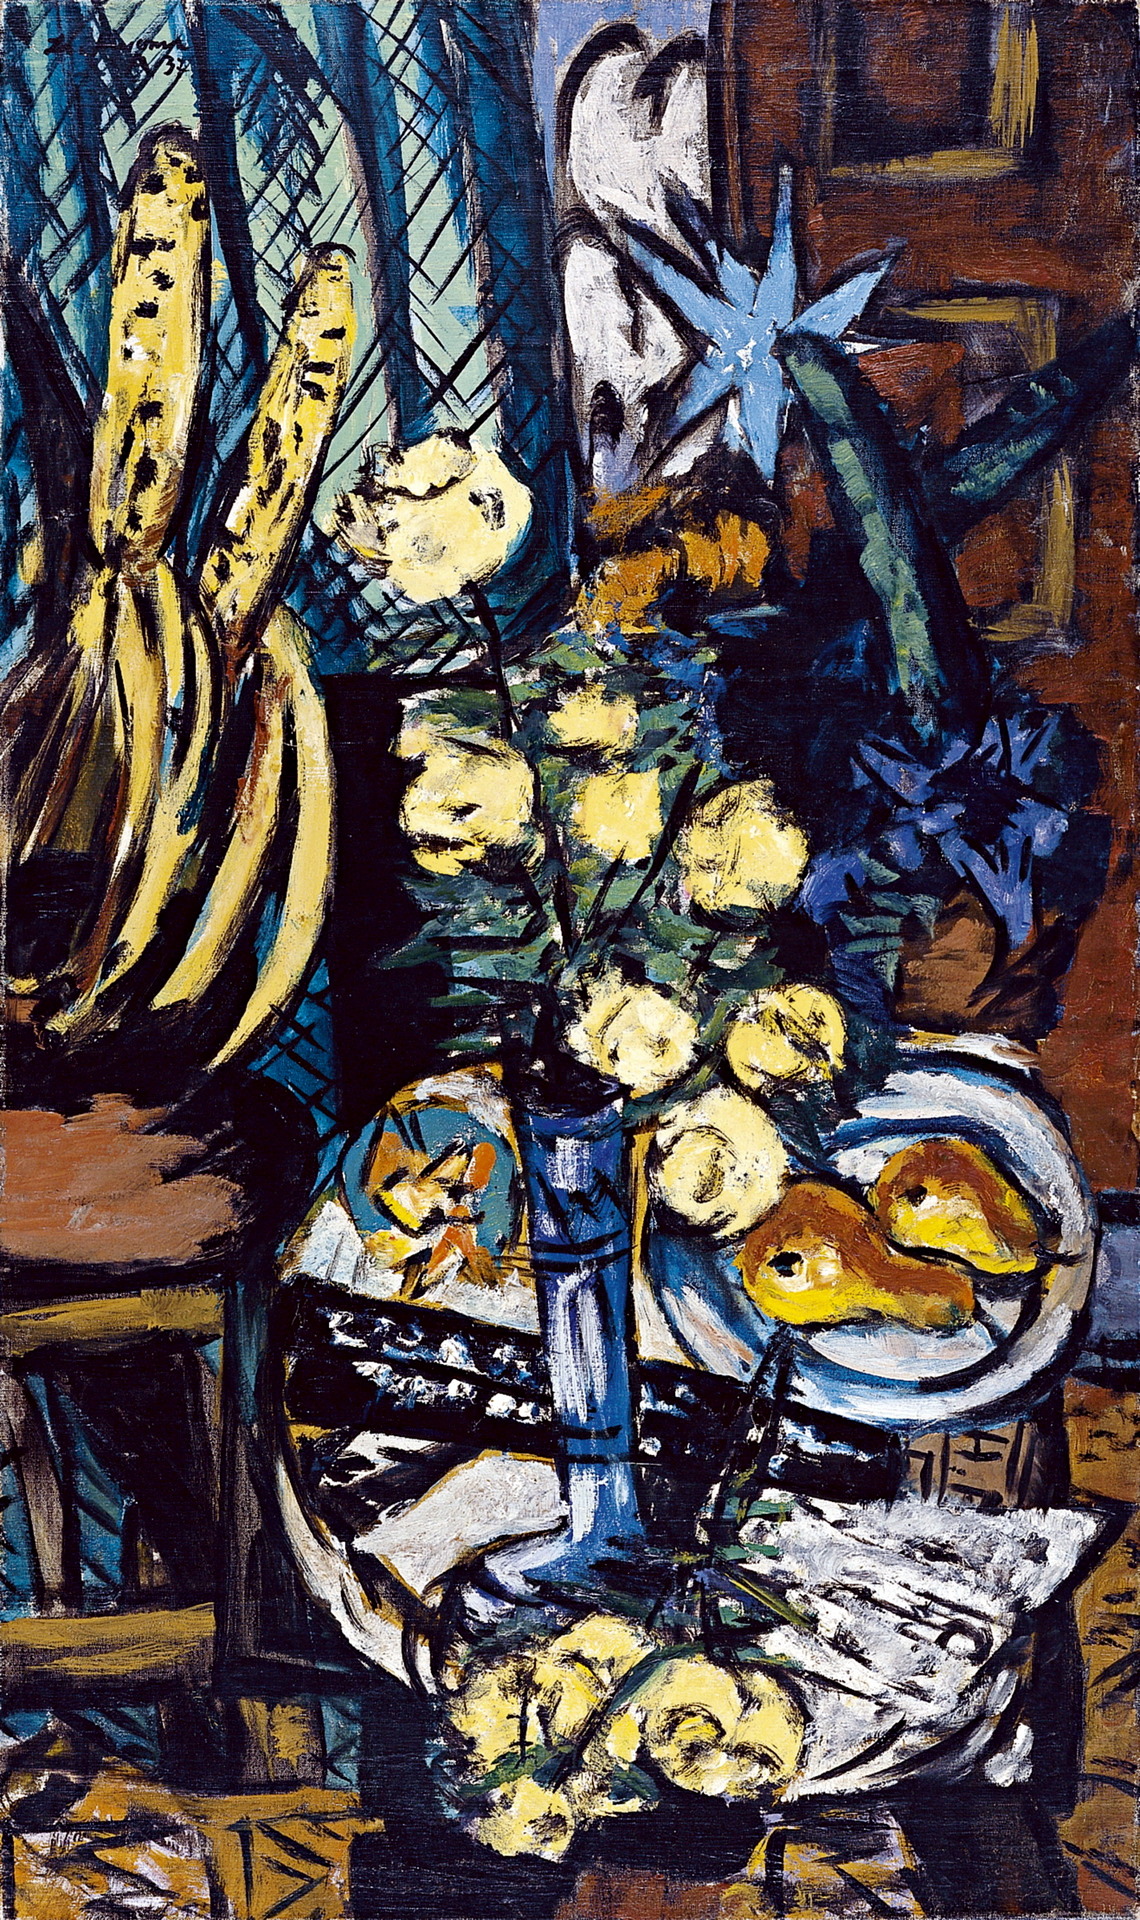 ilovetocollectart:  Max Beckmann - Still Life with Yellow Roses, 1937 